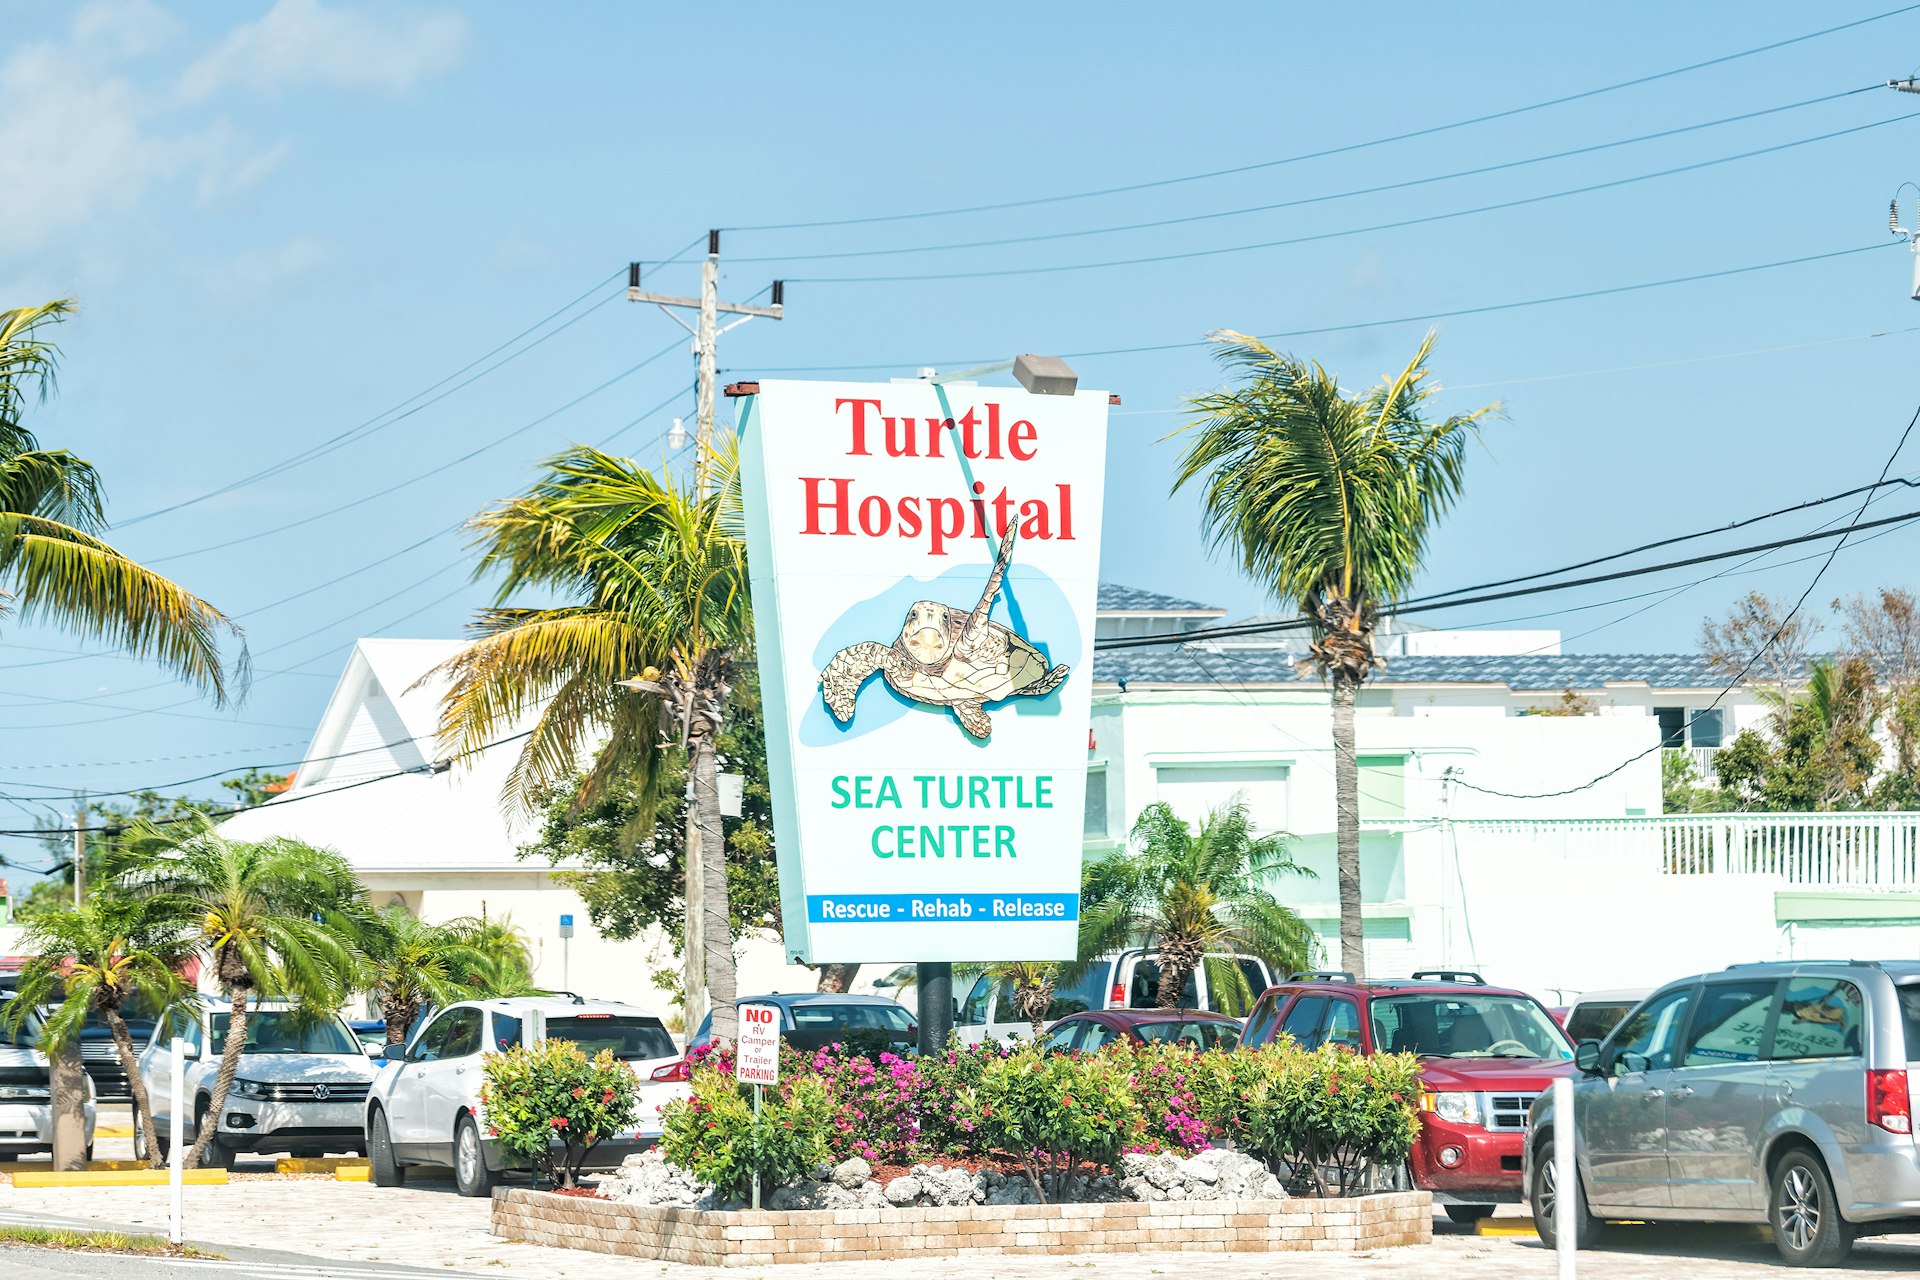 Features - Turtle Hospital, Sea center, clinic for wild animals, wildlife on overseas highway road, street, US1 route with cars, parking lot in Florida keys, key